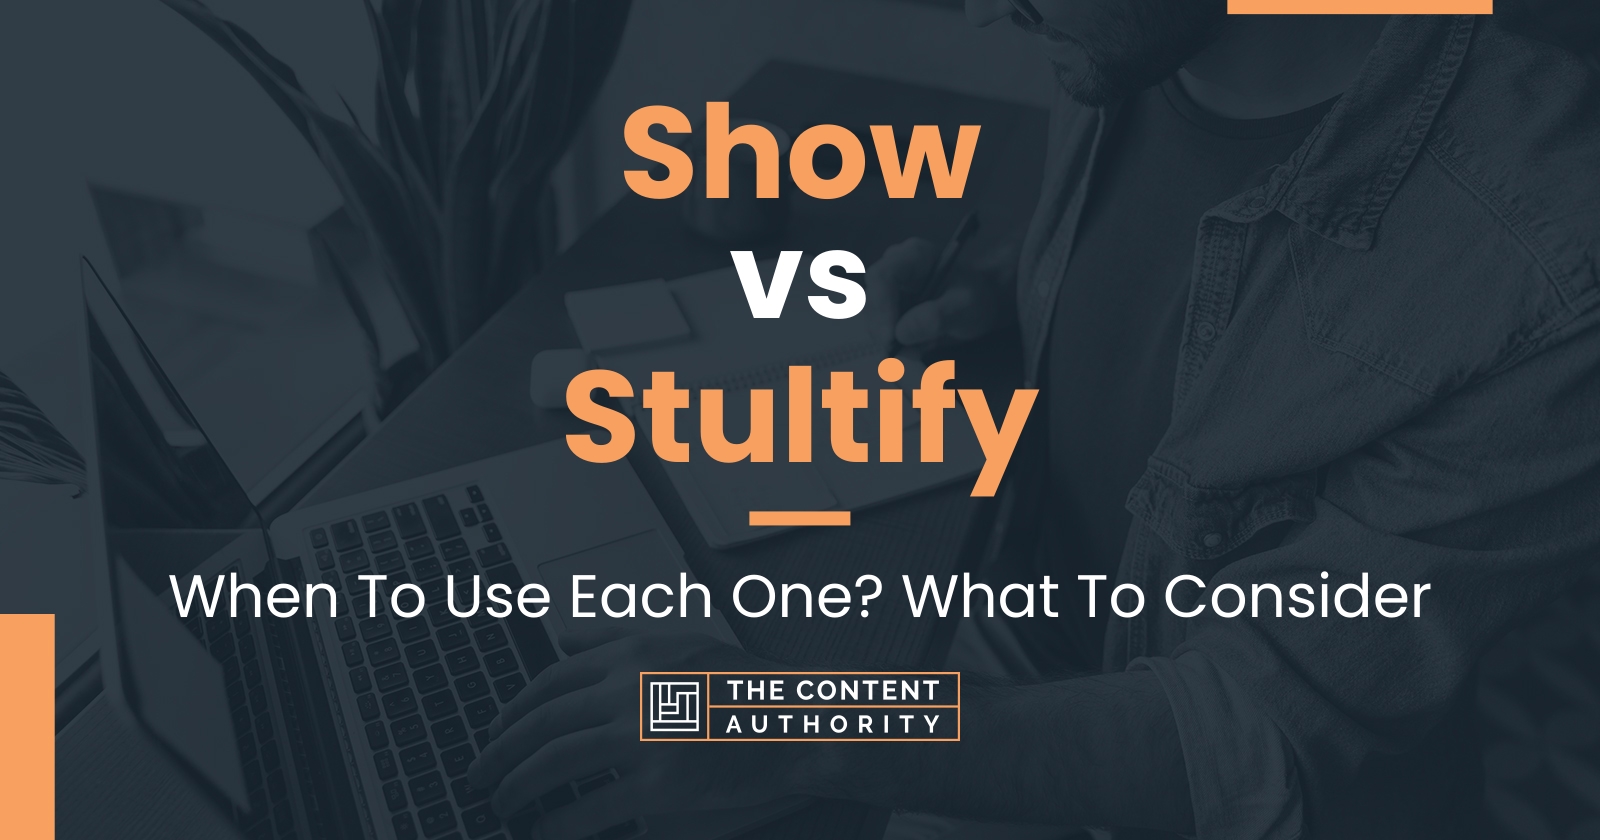 Show vs Stultify: When To Use Each One? What To Consider